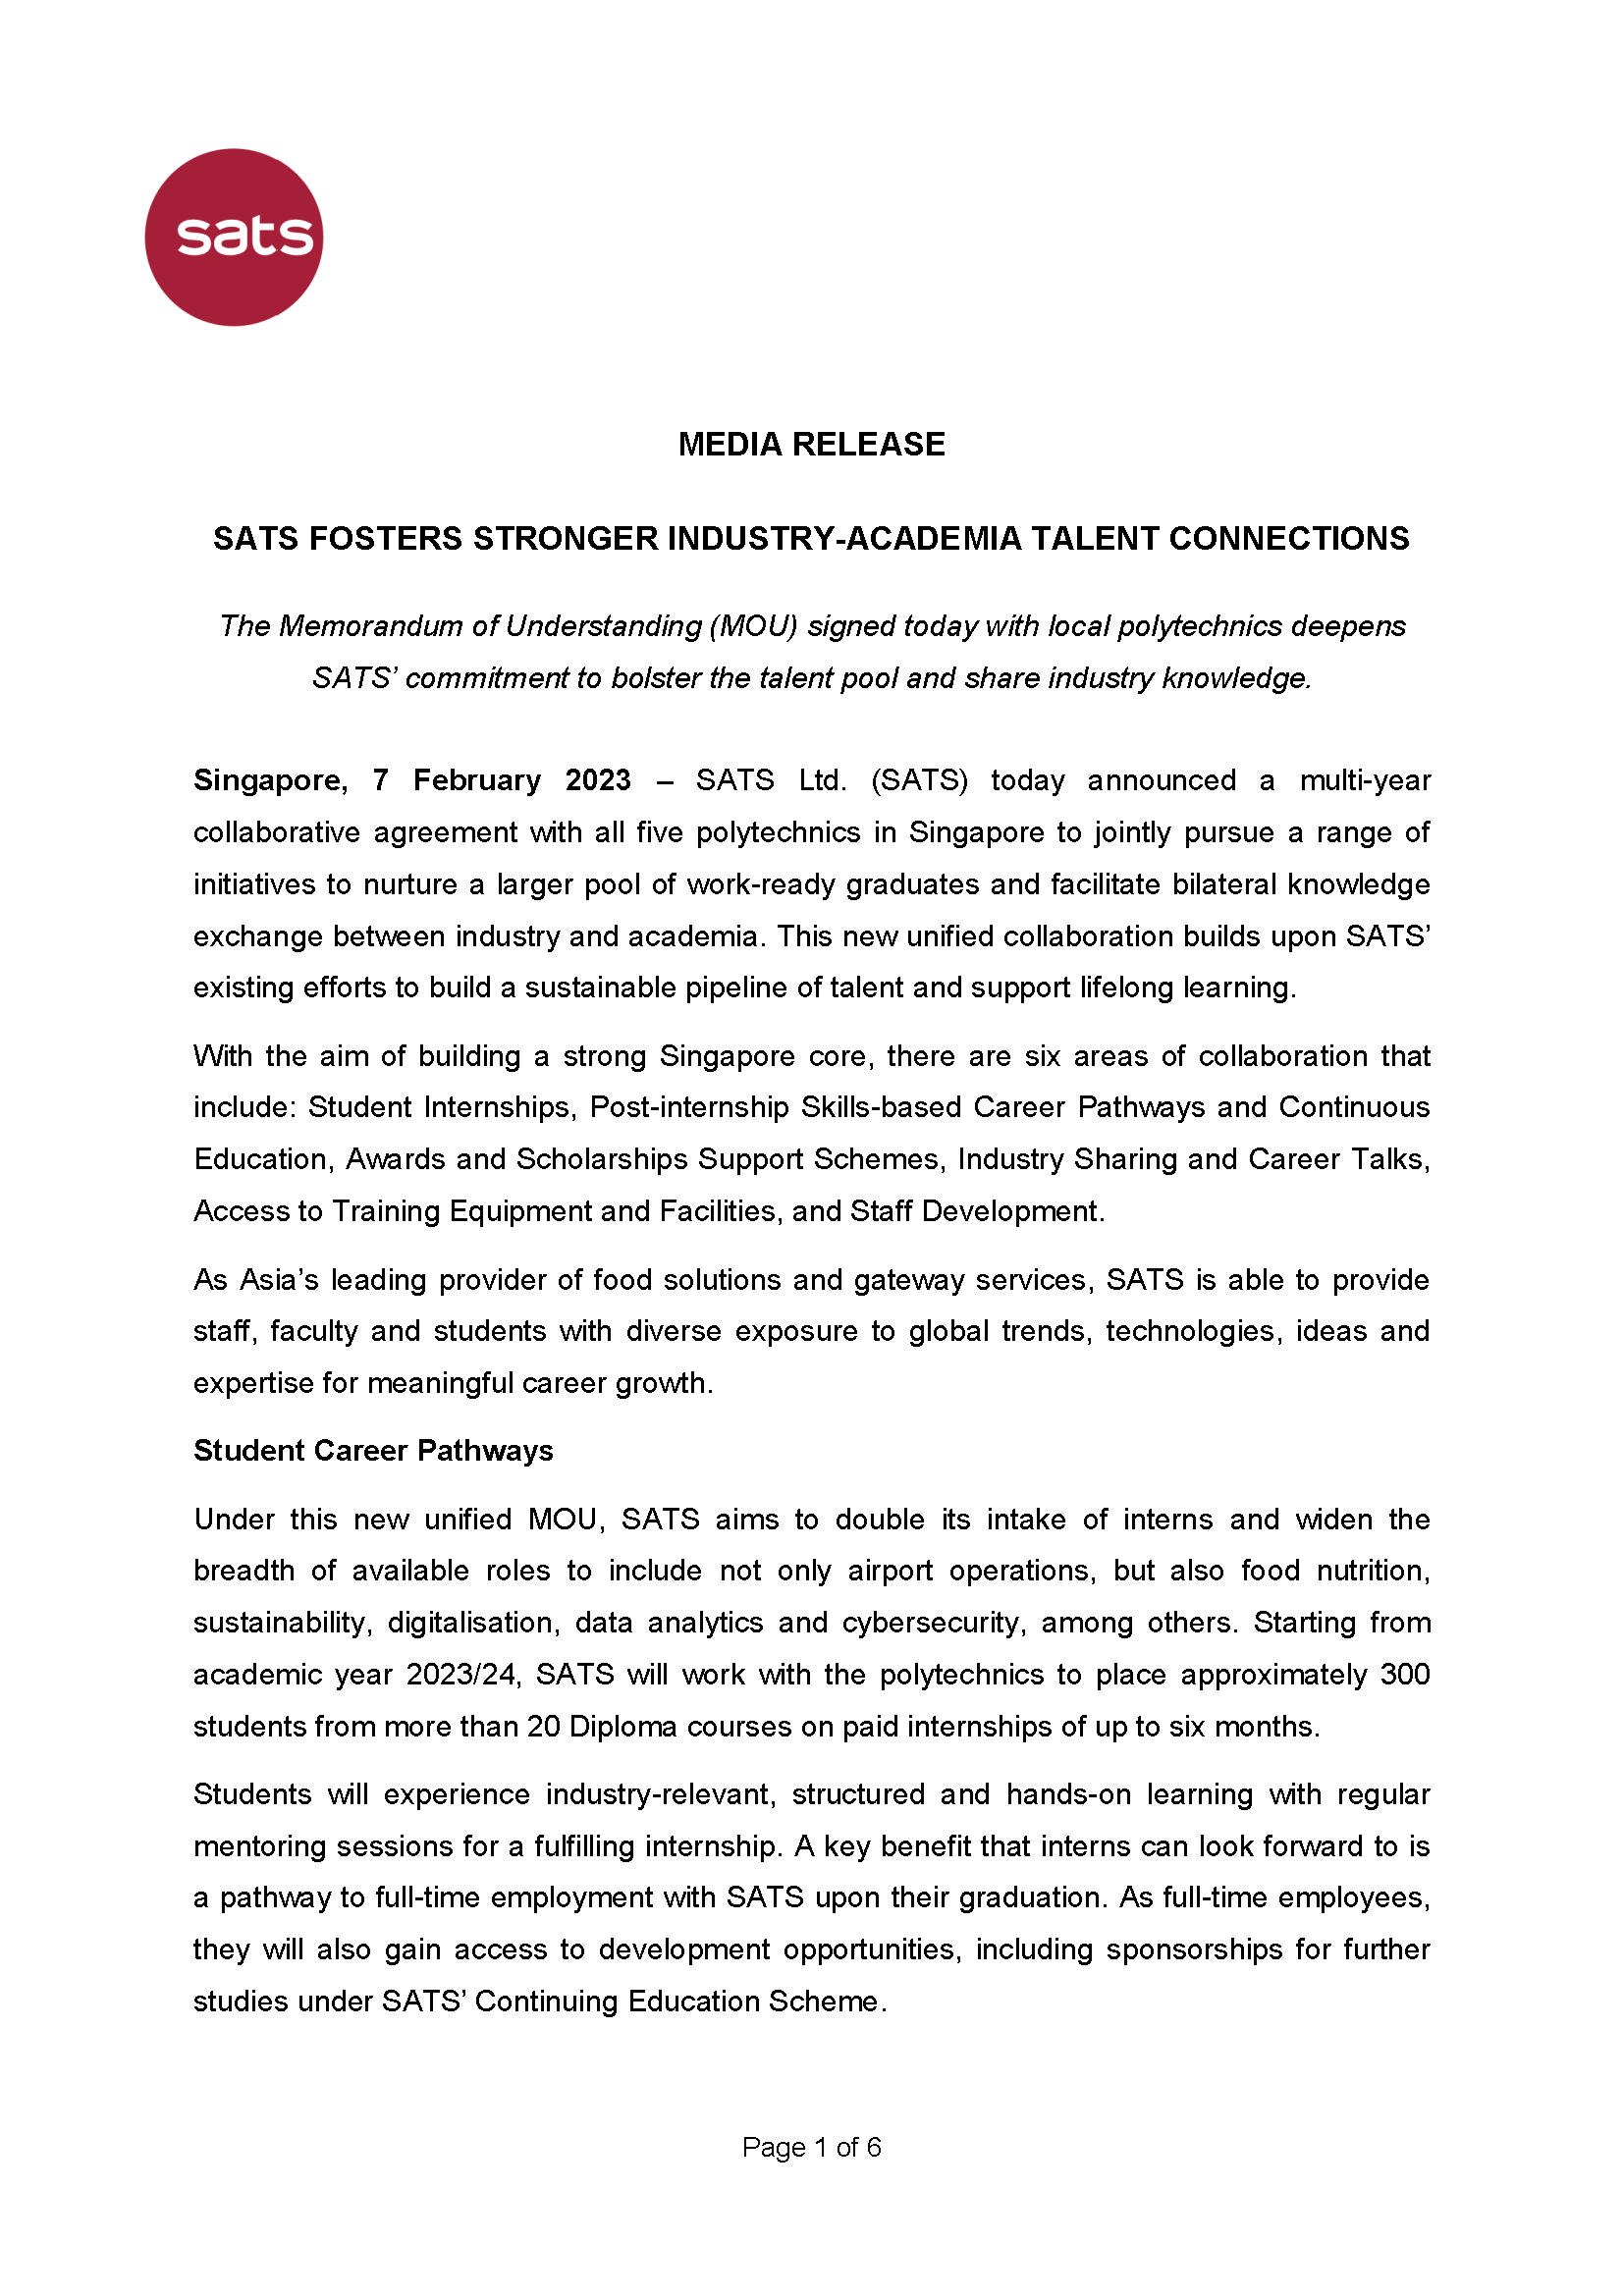 20230206_1200 SATS Media Release on MOU with Polytechnics_forPolytechnics_Page_1